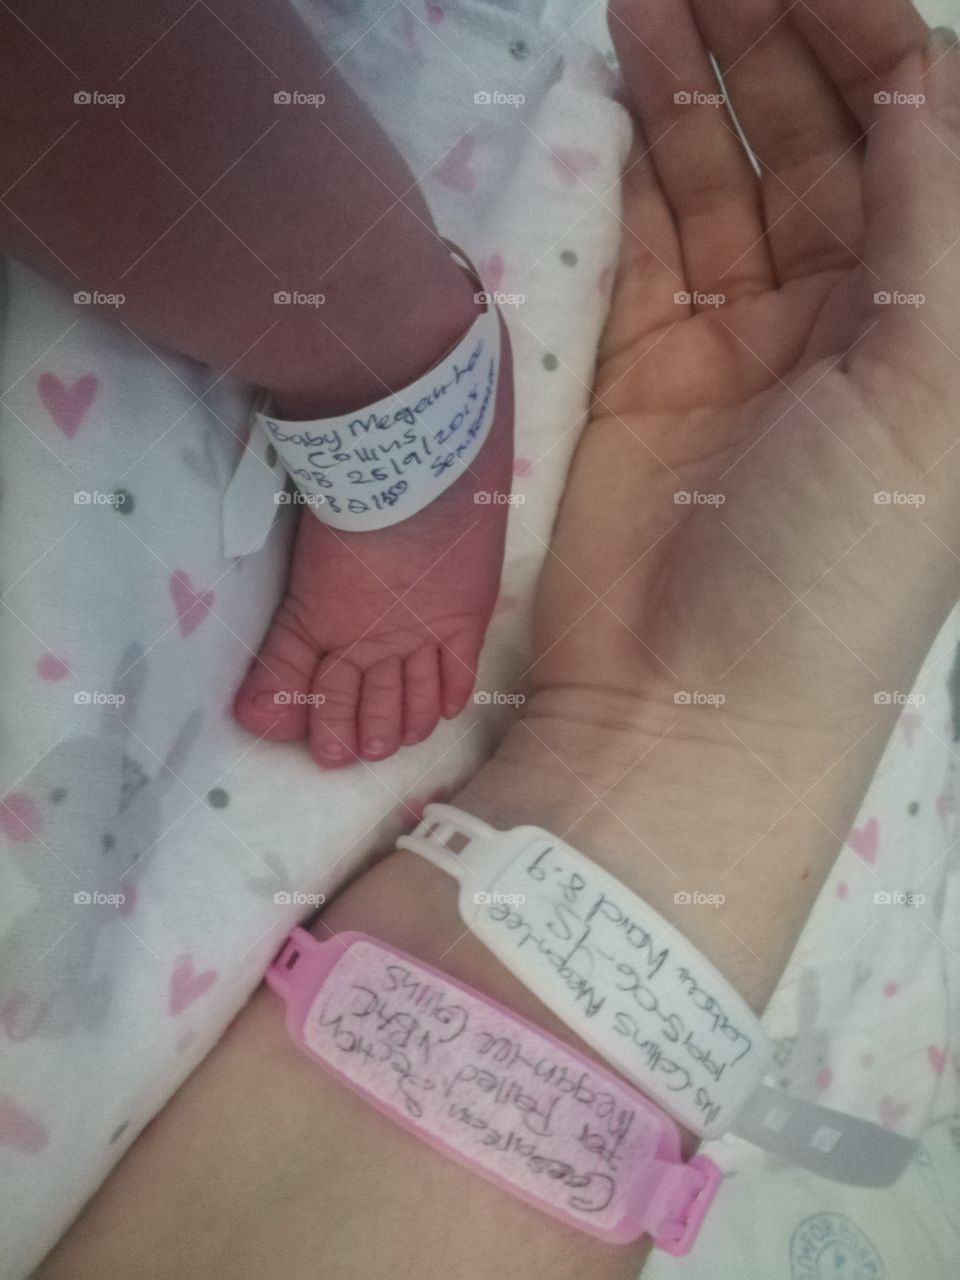 Hospital baby foot and mother's hand